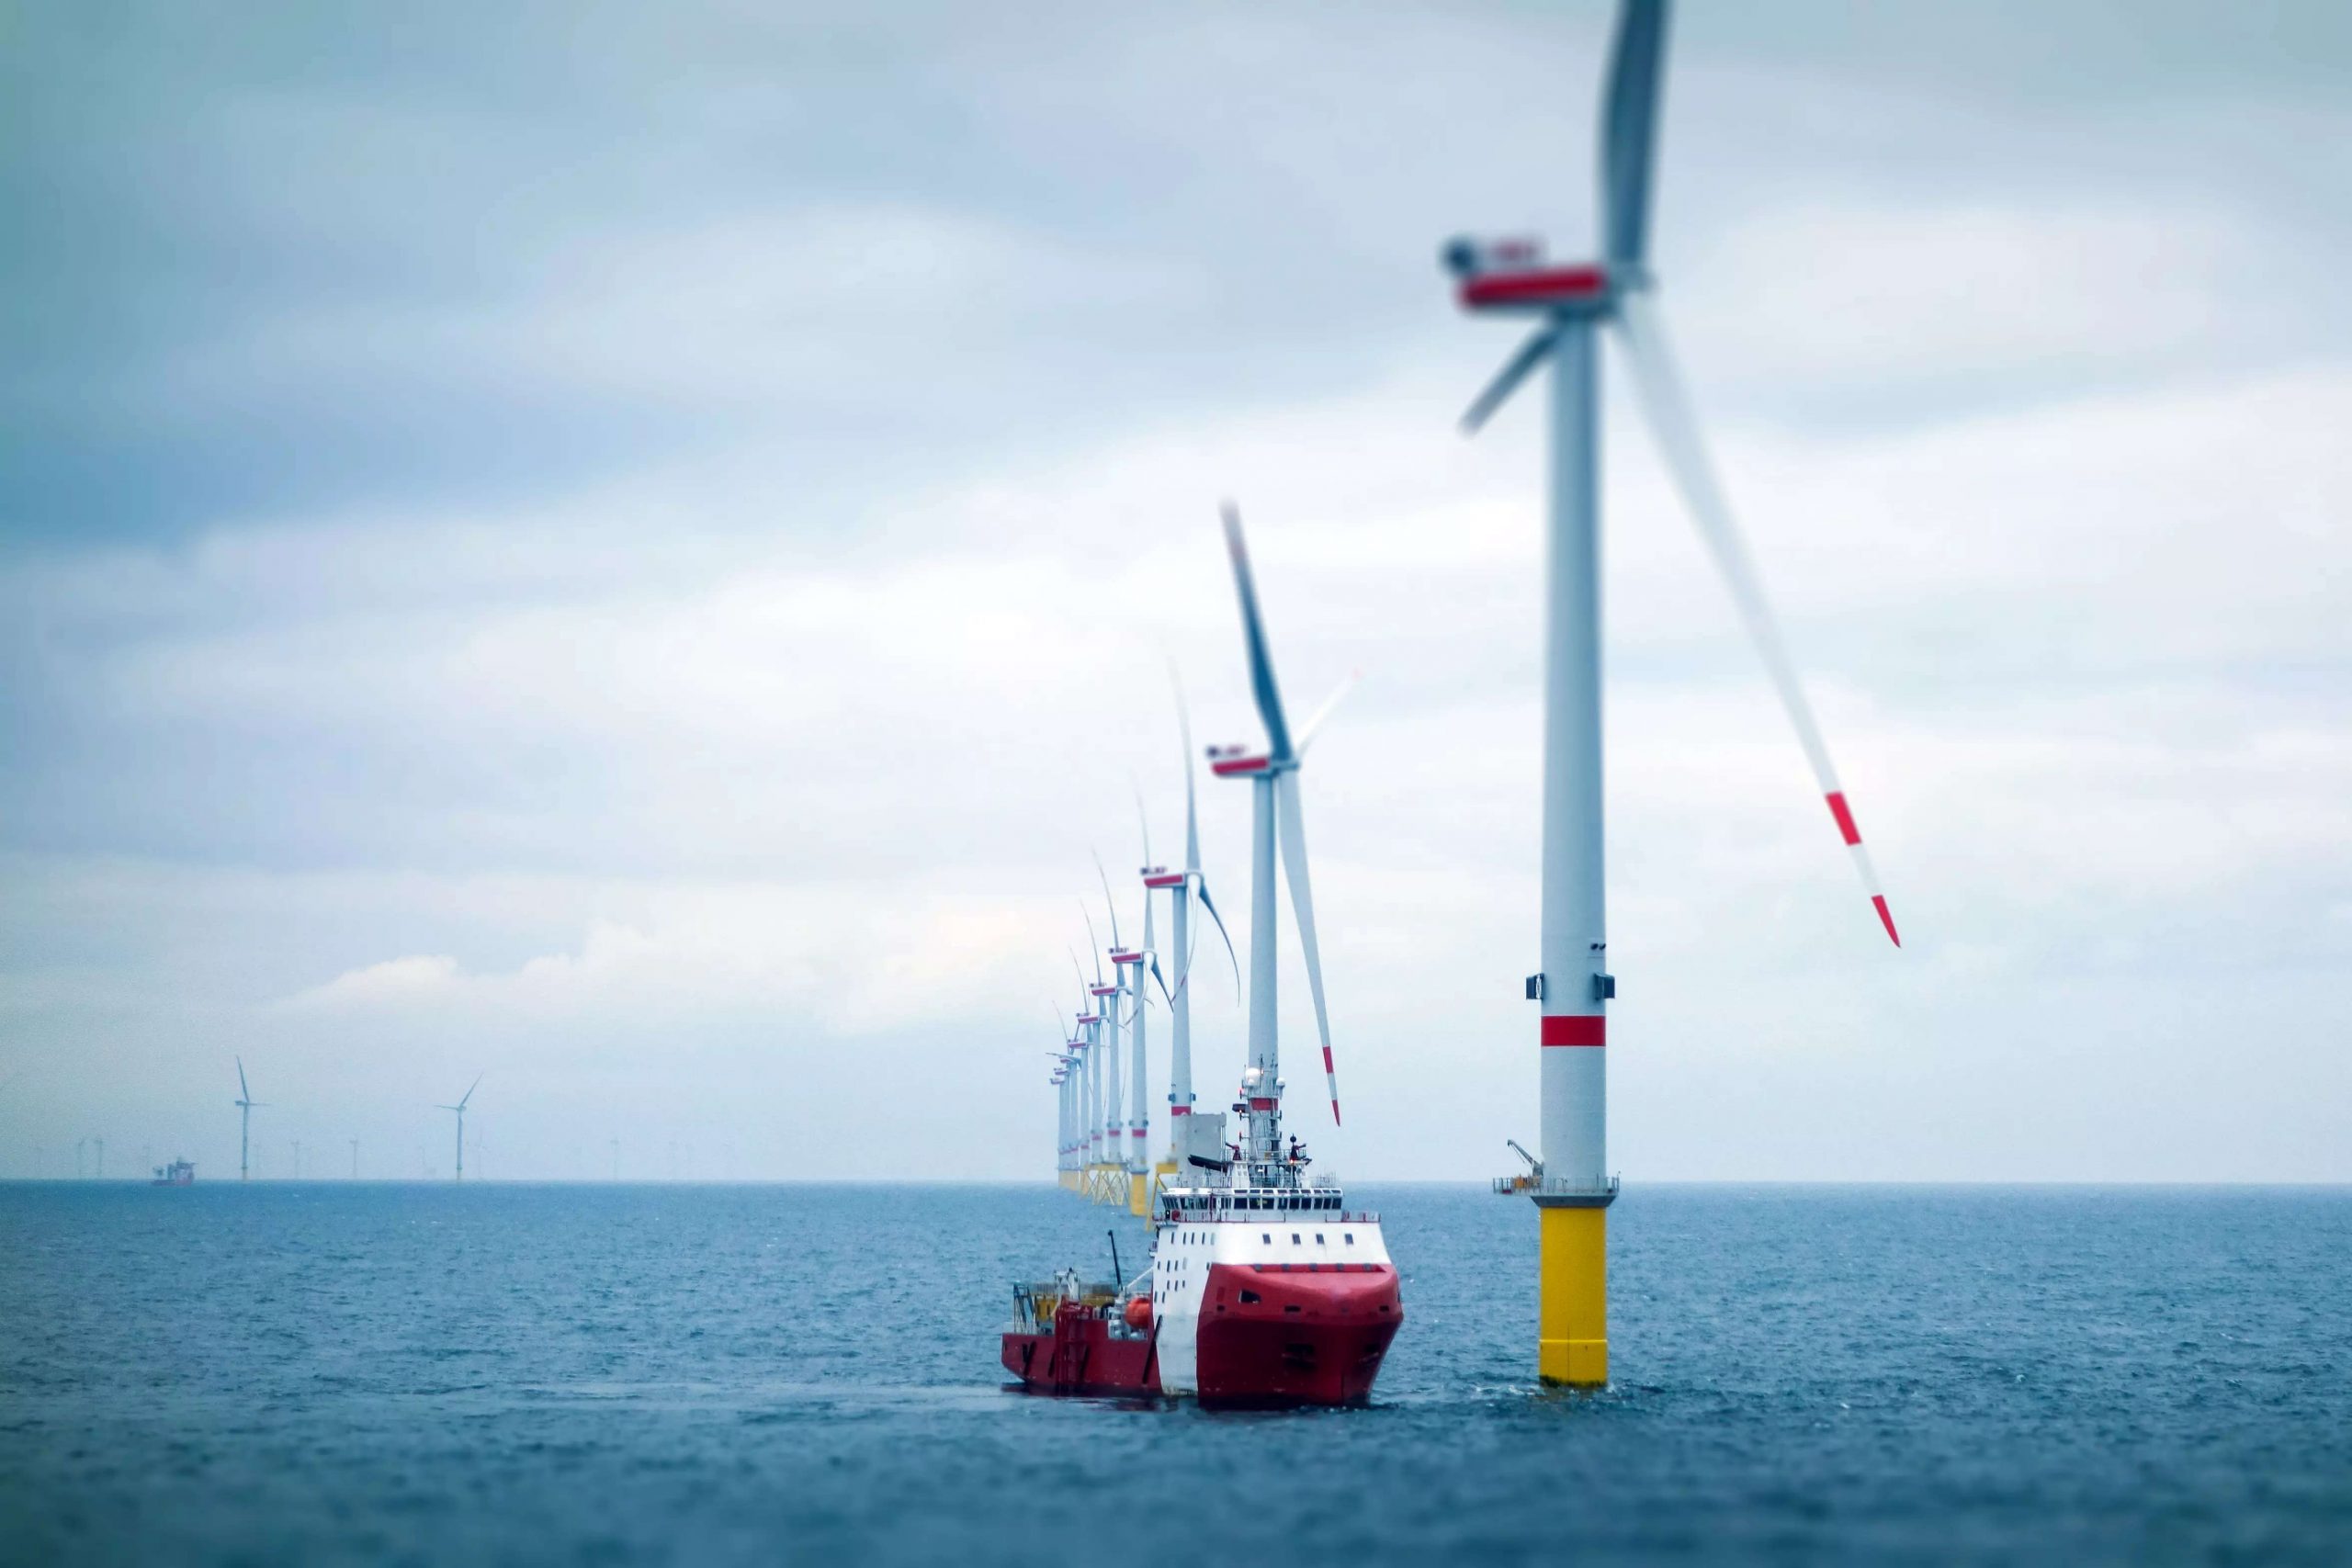 Govt boosts offshore wind energy with new leasing regulations, ET EnergyWorld